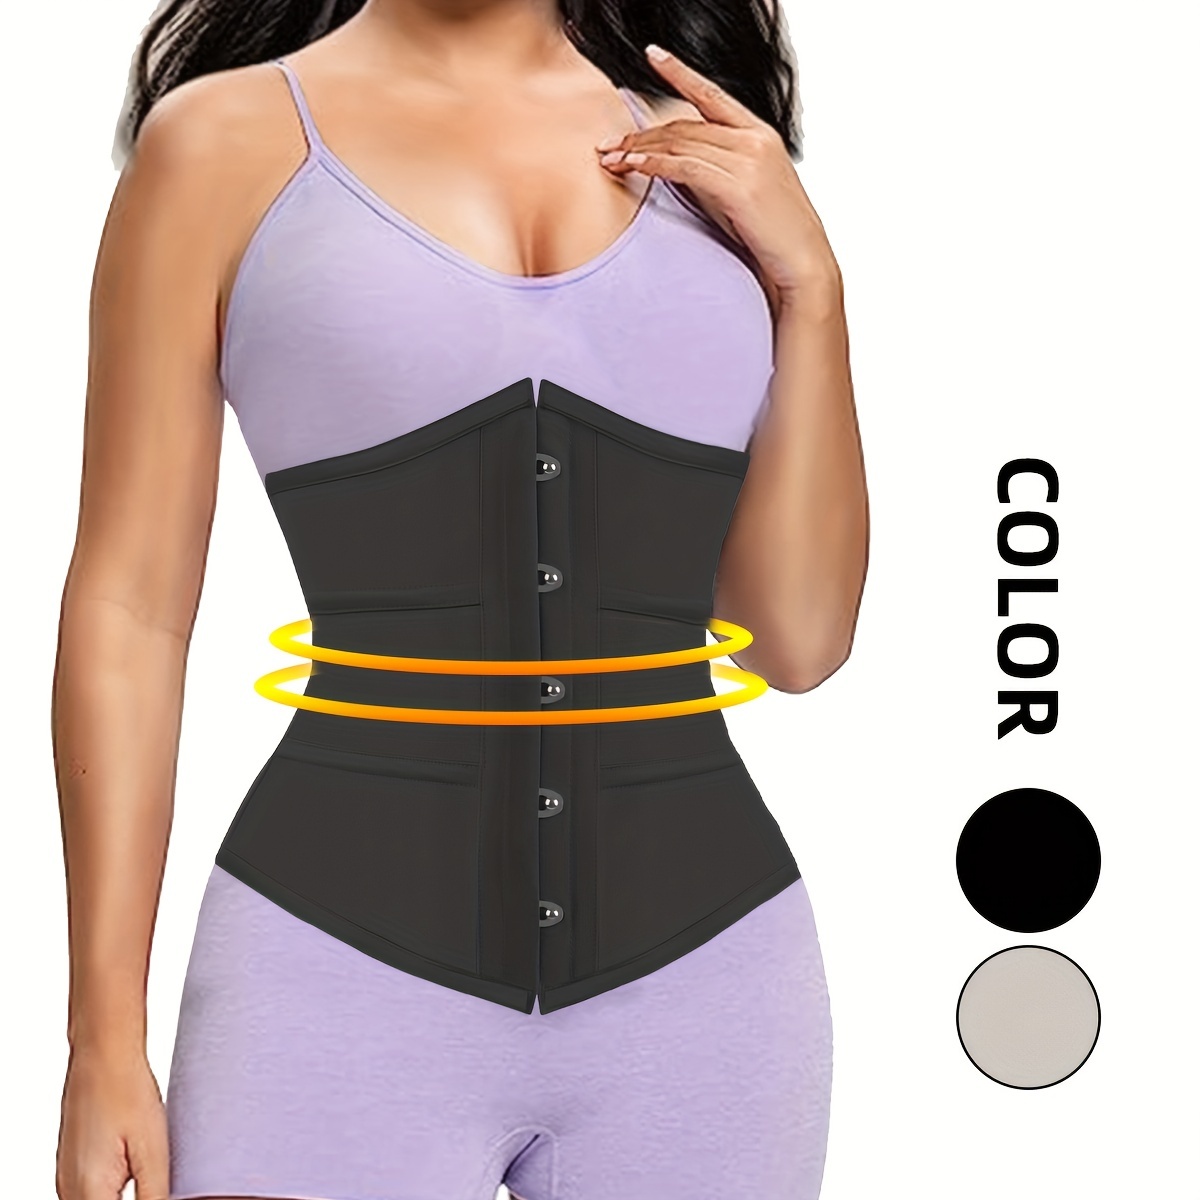 hezkart.com Qatar - 💖Women Waist Trainer Slim Corset Trimmer Belt for 79  QAR ✓Order Now  🚛 FREE SHIPPING 🚛 🔹Colors-  Black and Pink 🔹Available size: S, M, L, XL, and 3XL